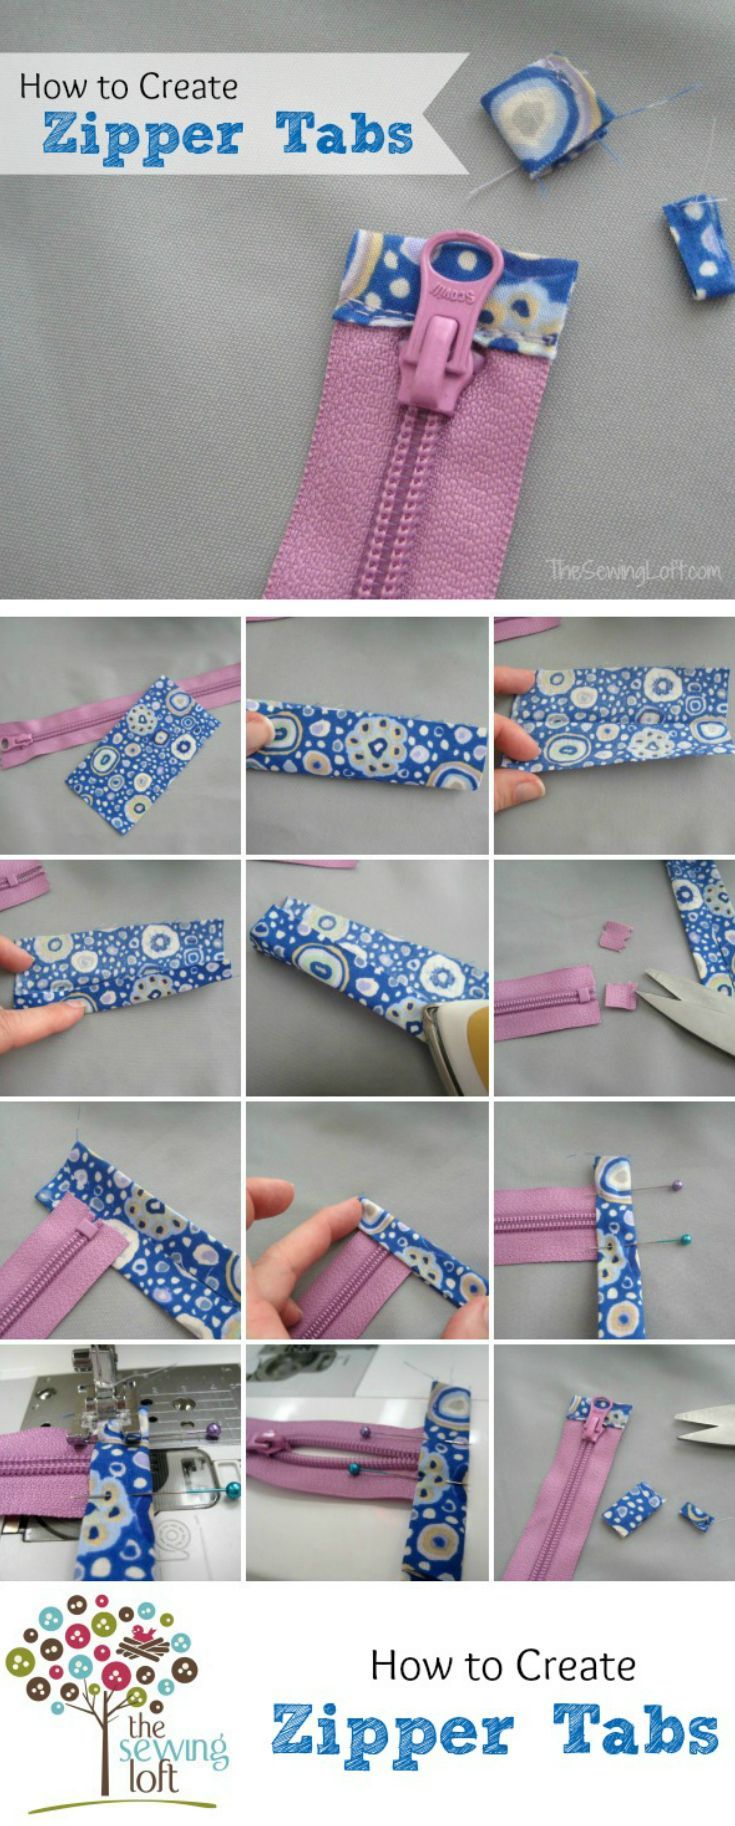 Zipper tabs are functional, plus can add a creative and decorative detail. Perfect for neatening the e